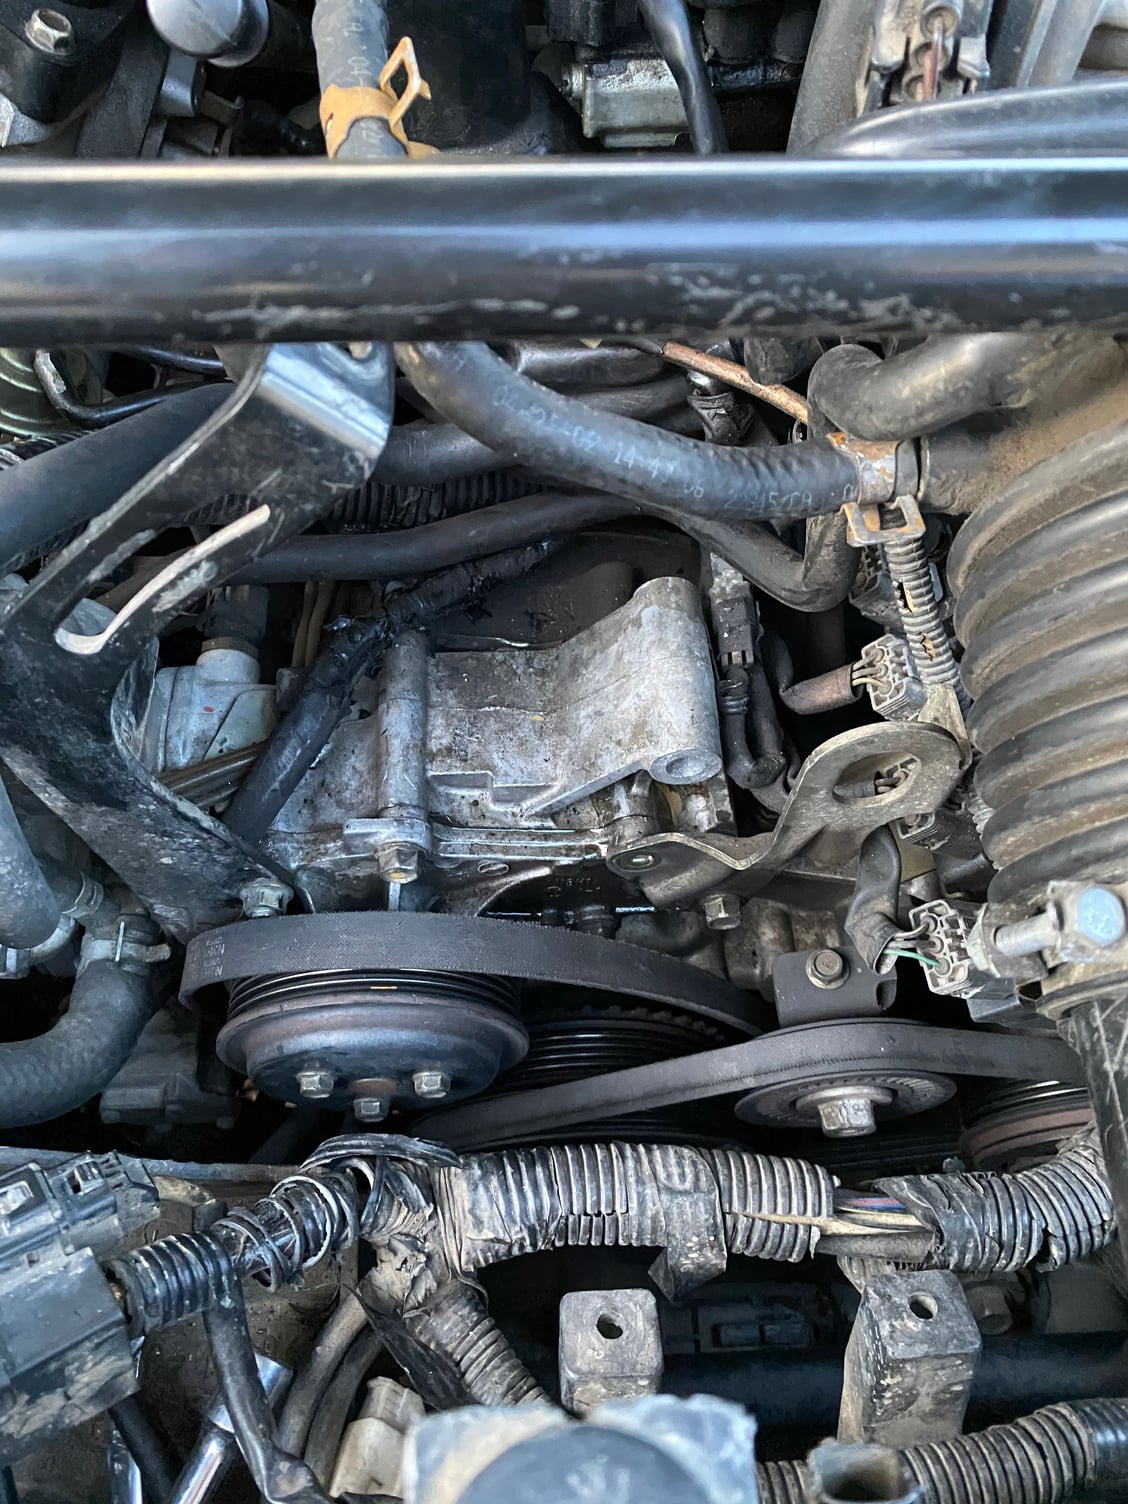 disconnected-hose-behind-alternator-where-does-it-go-rx8club